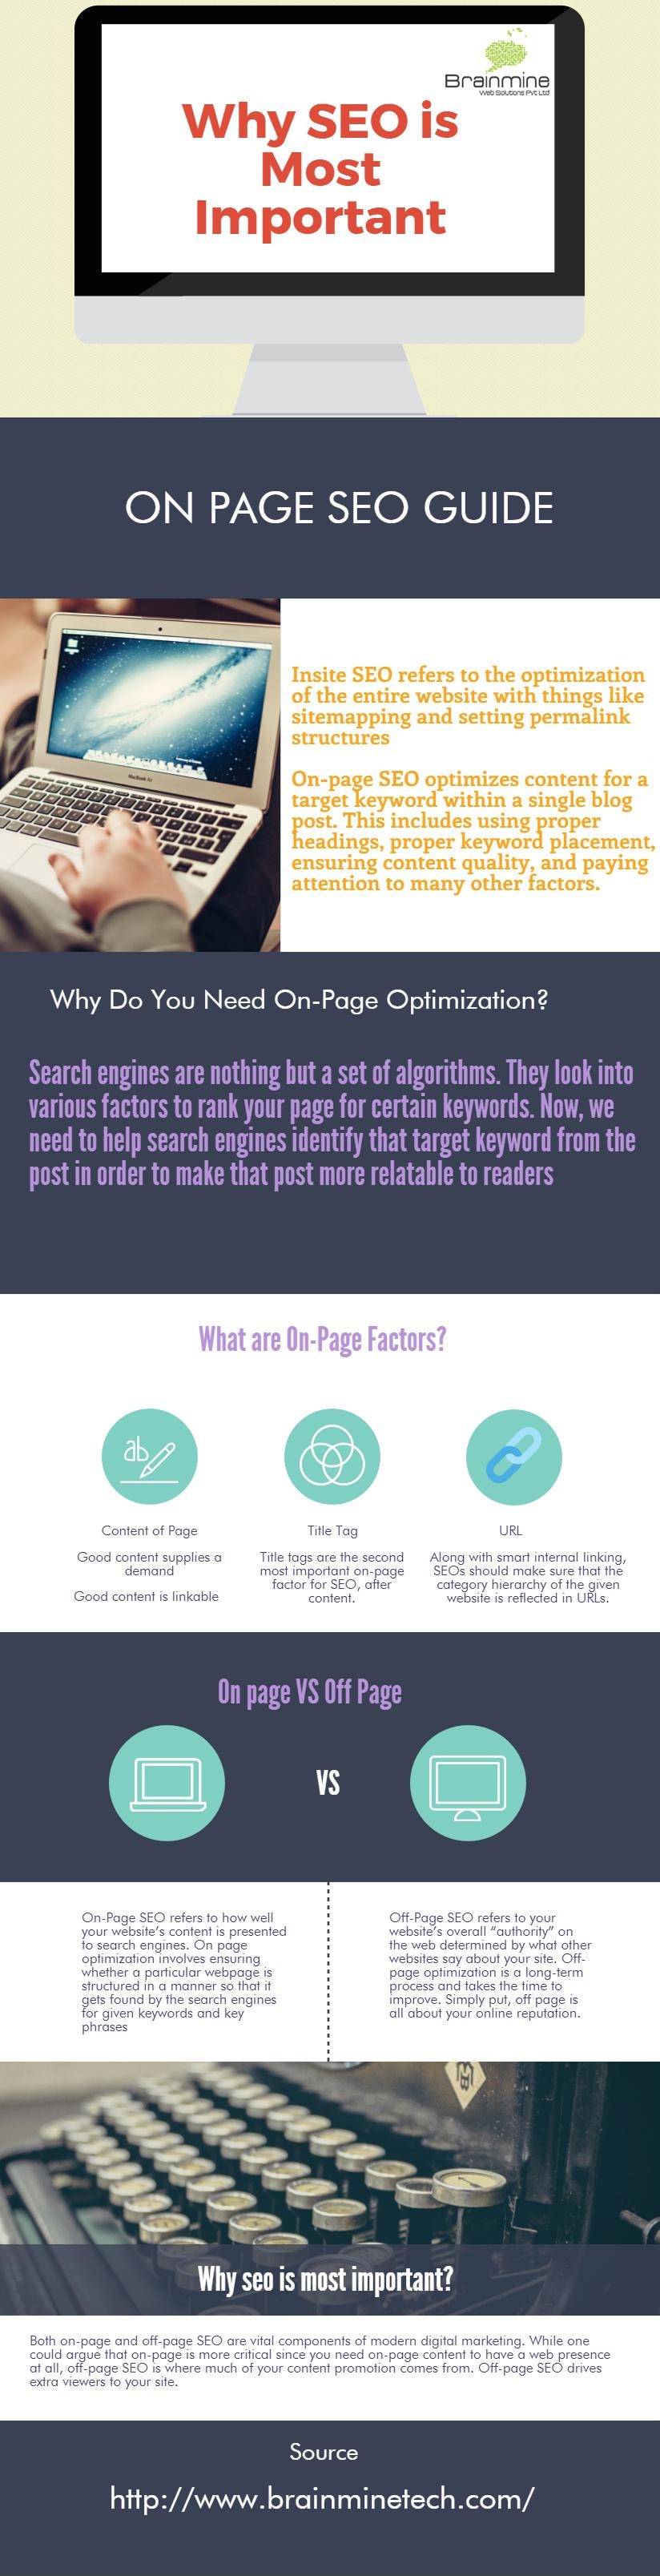 Why SEO is most important